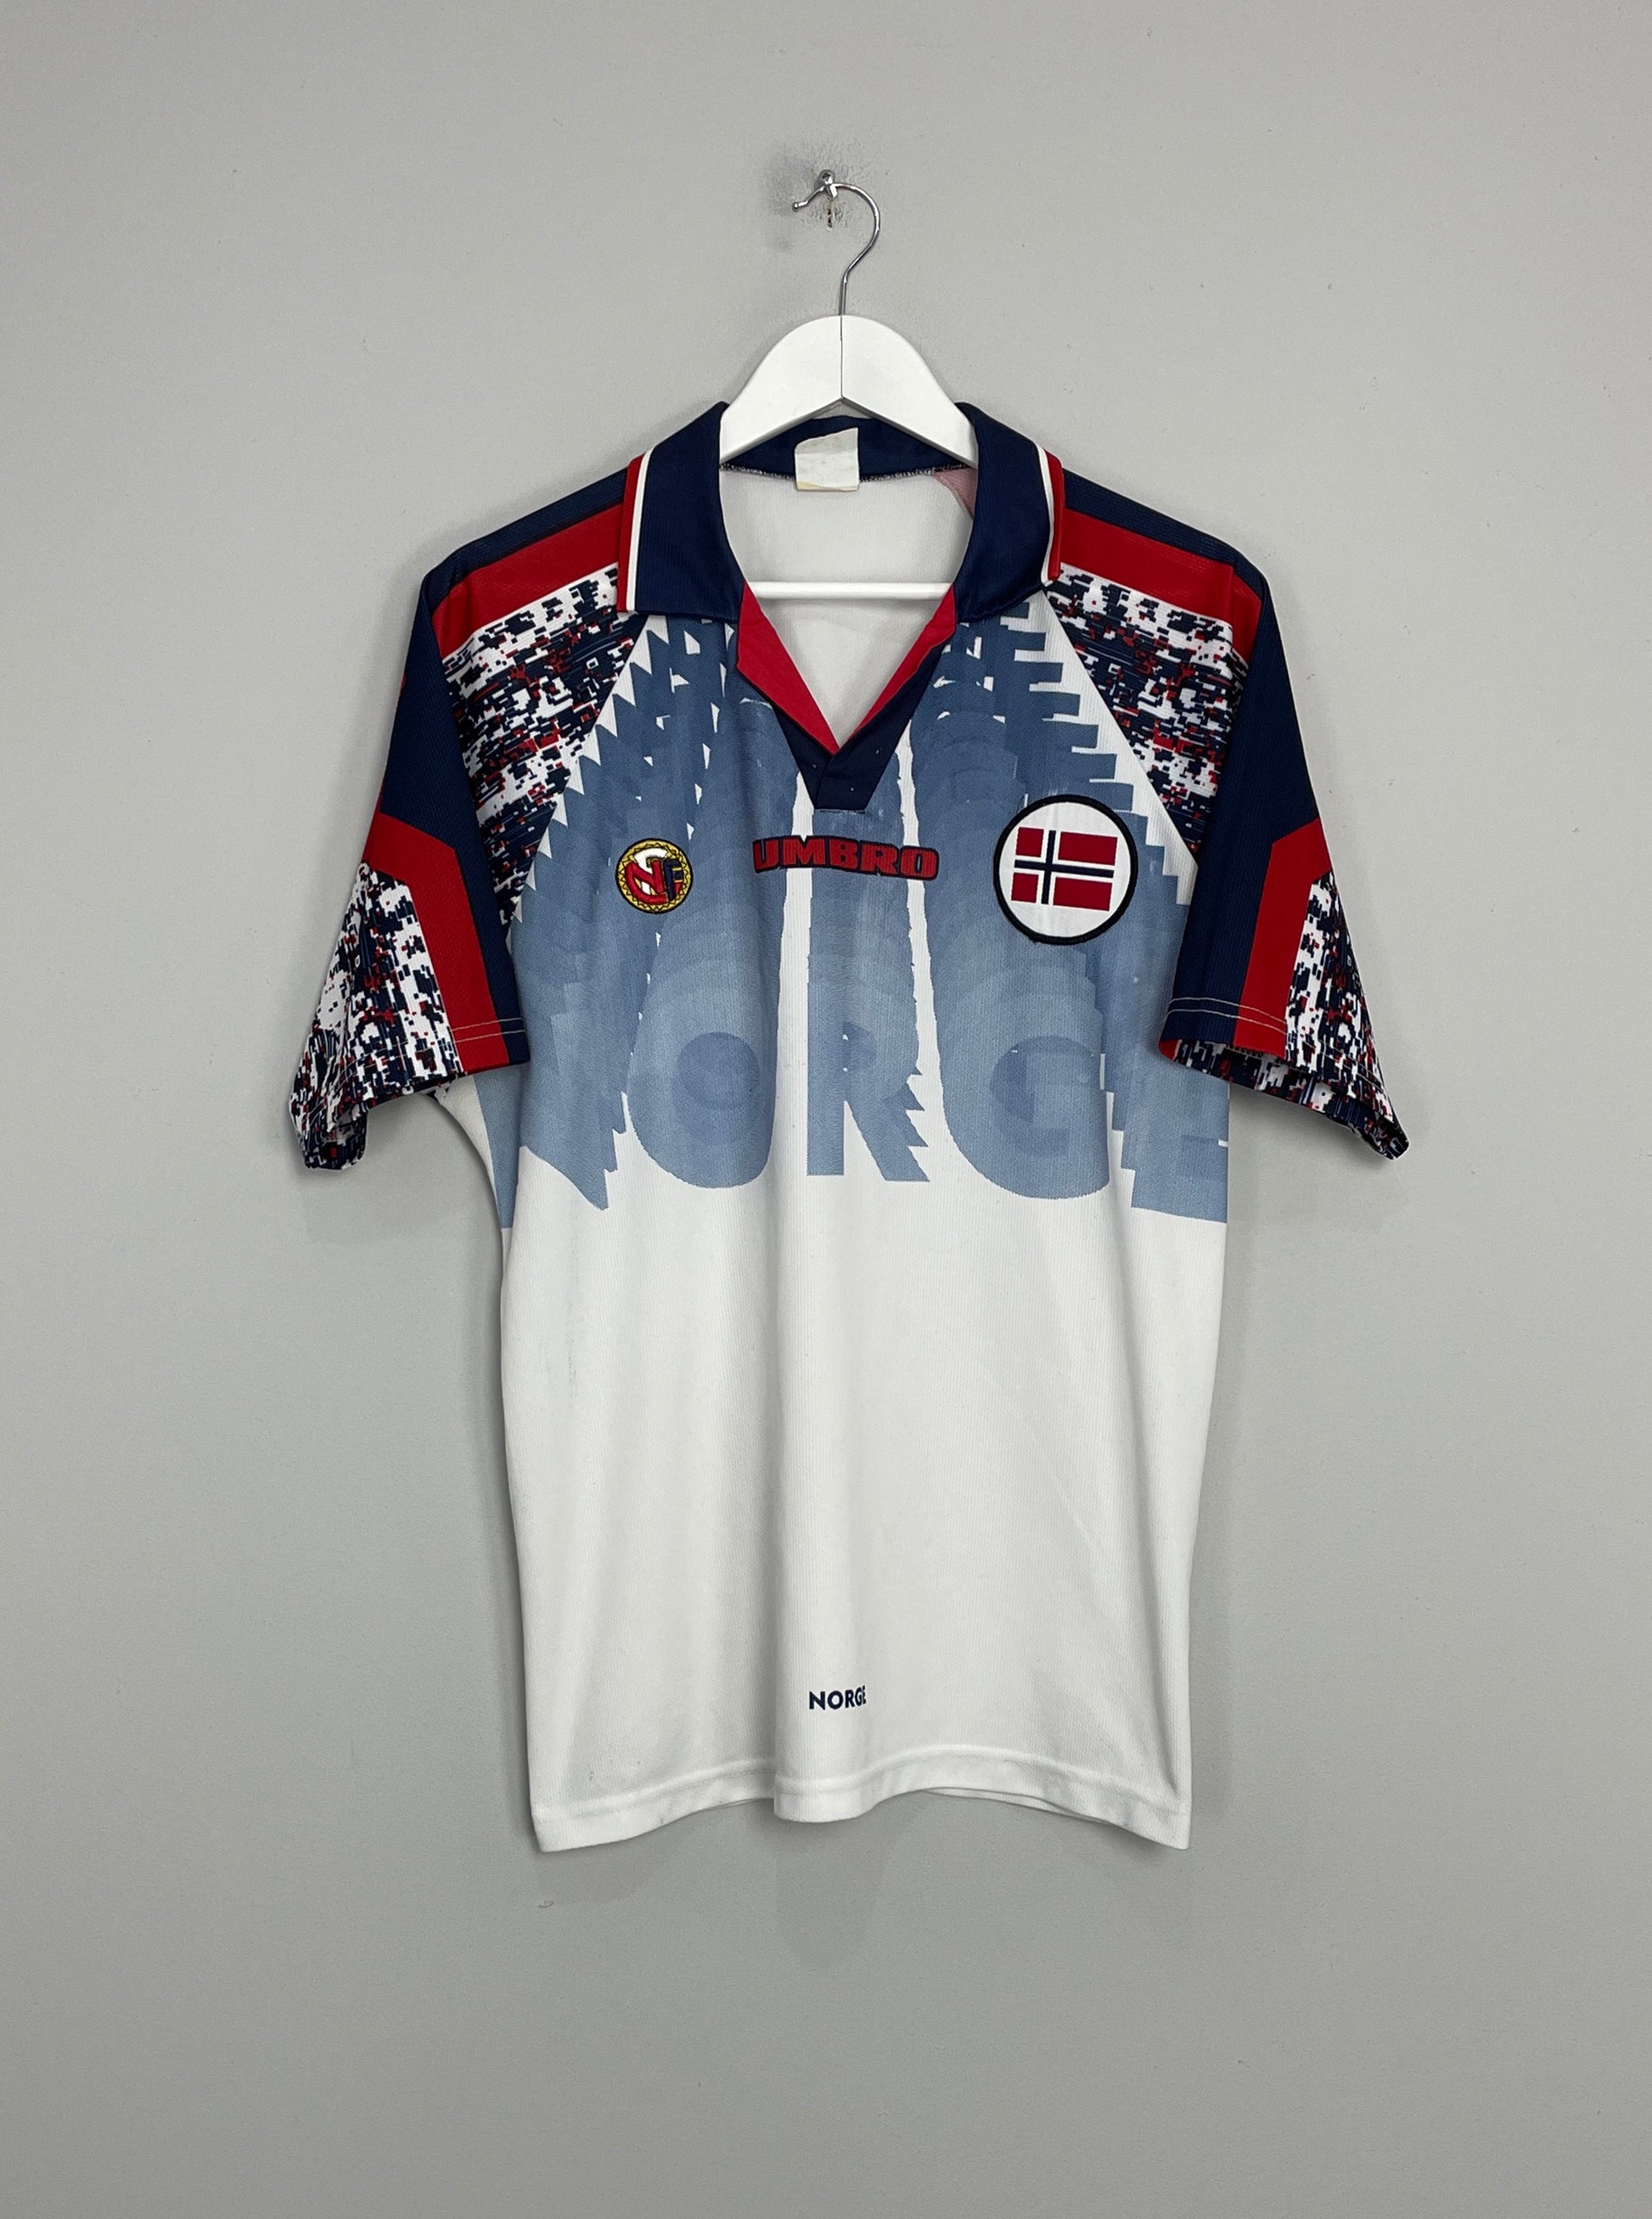 Image of the Norway shirt from the 1997/98 season